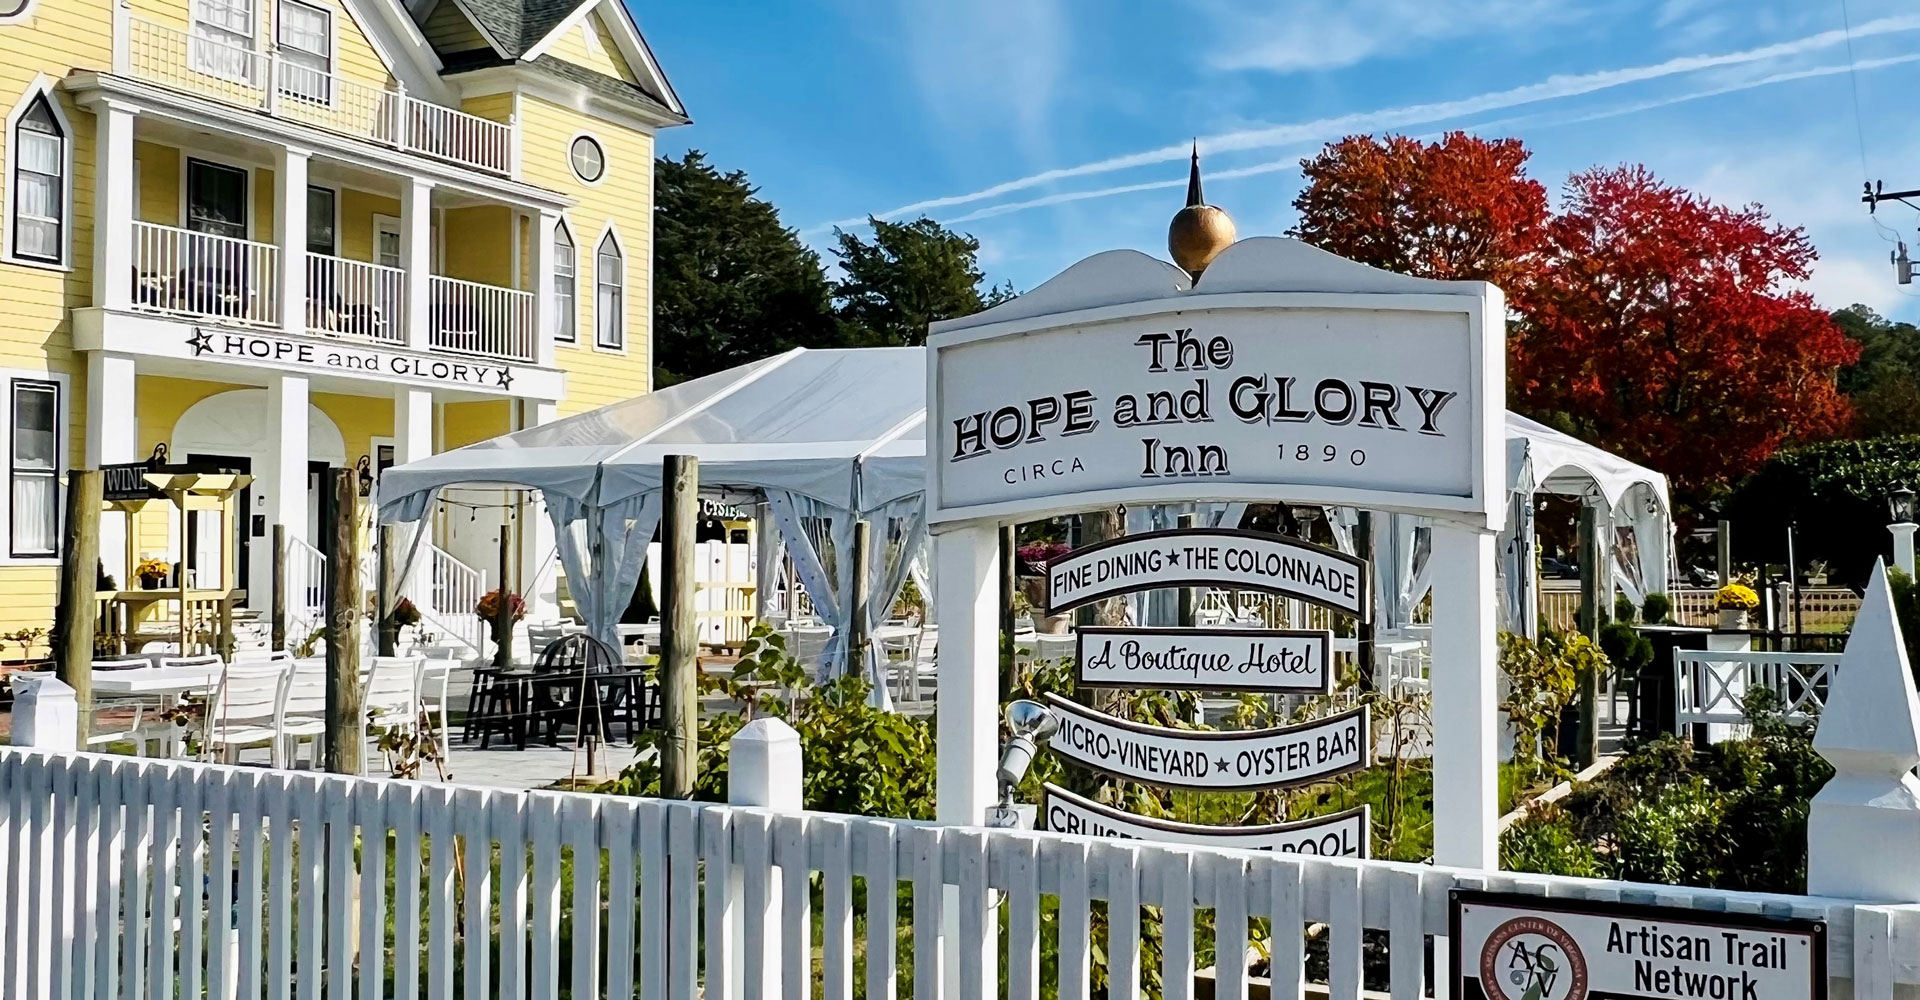 Wine and oyster pairings at The Hope & Glory Inn make it a must-visit food destination.